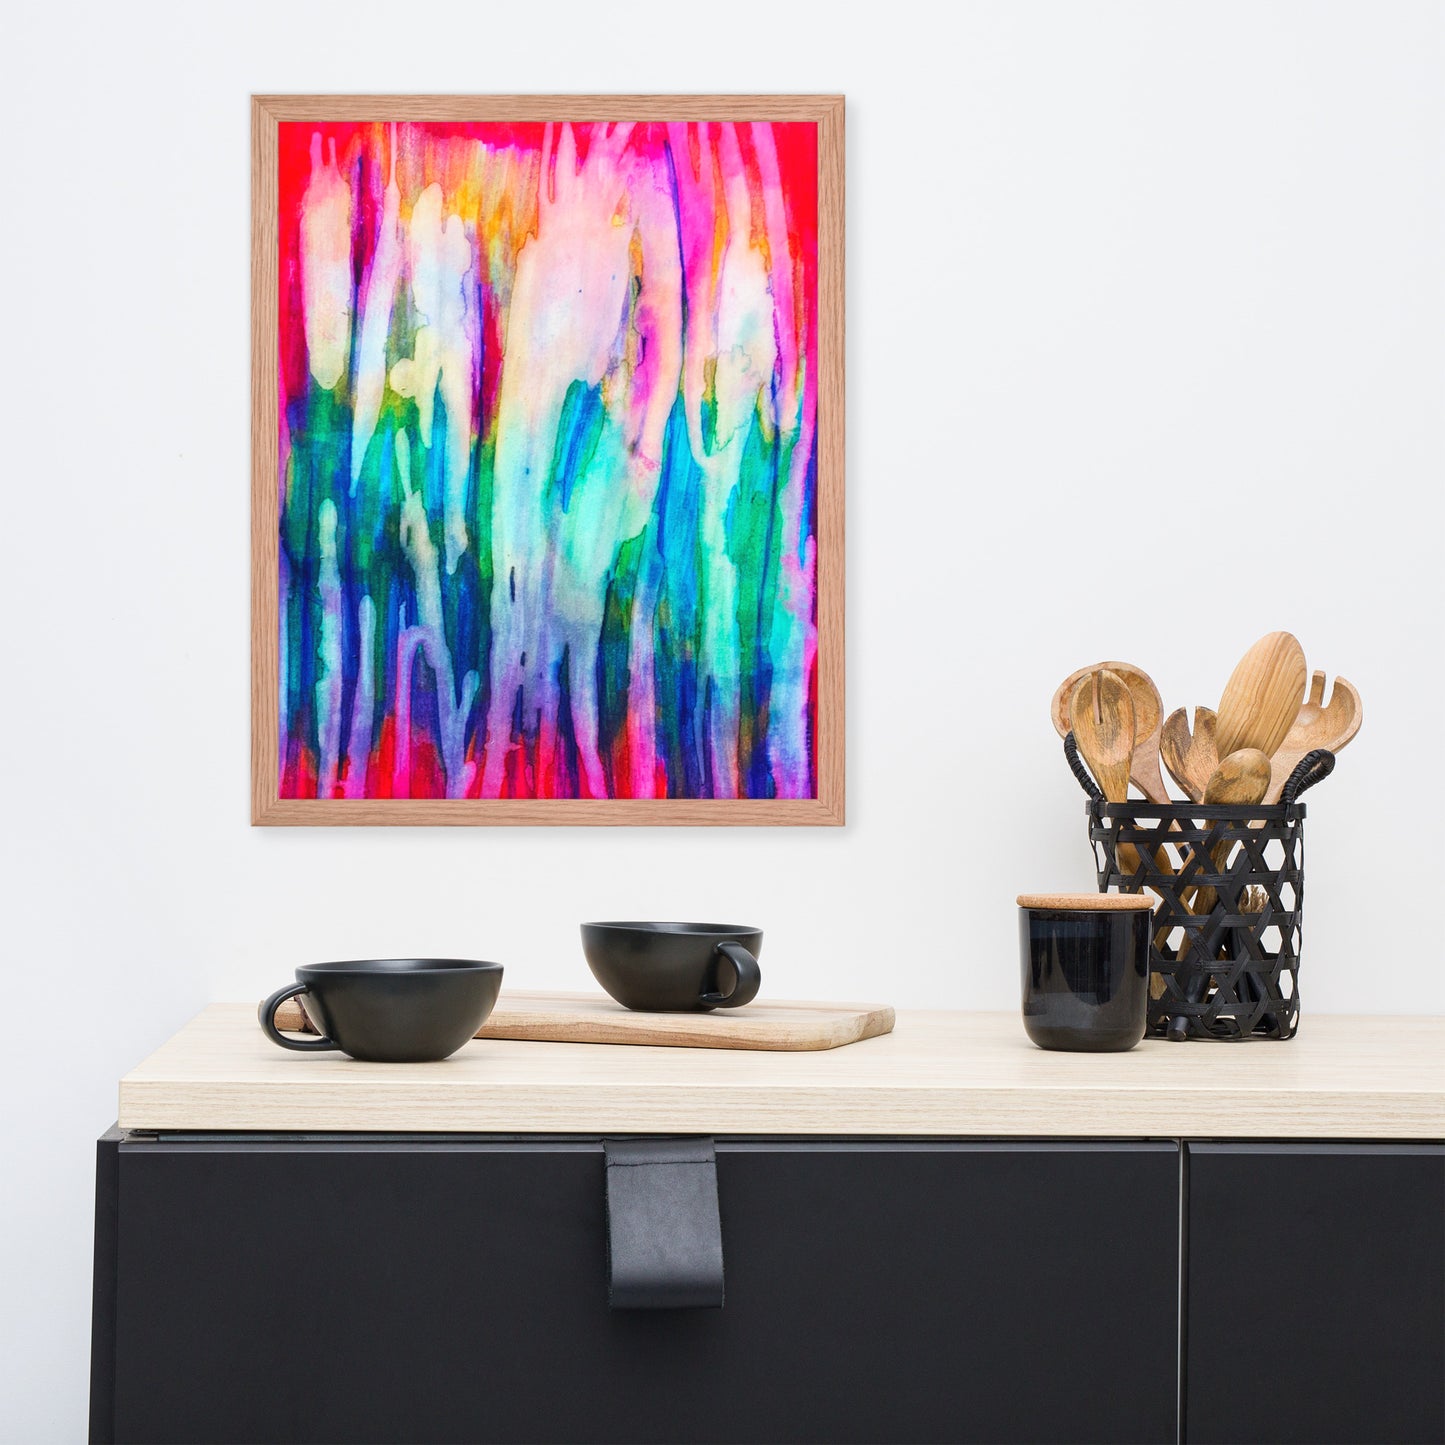 Glowing Abstract Poster Framed - Art Love Decor